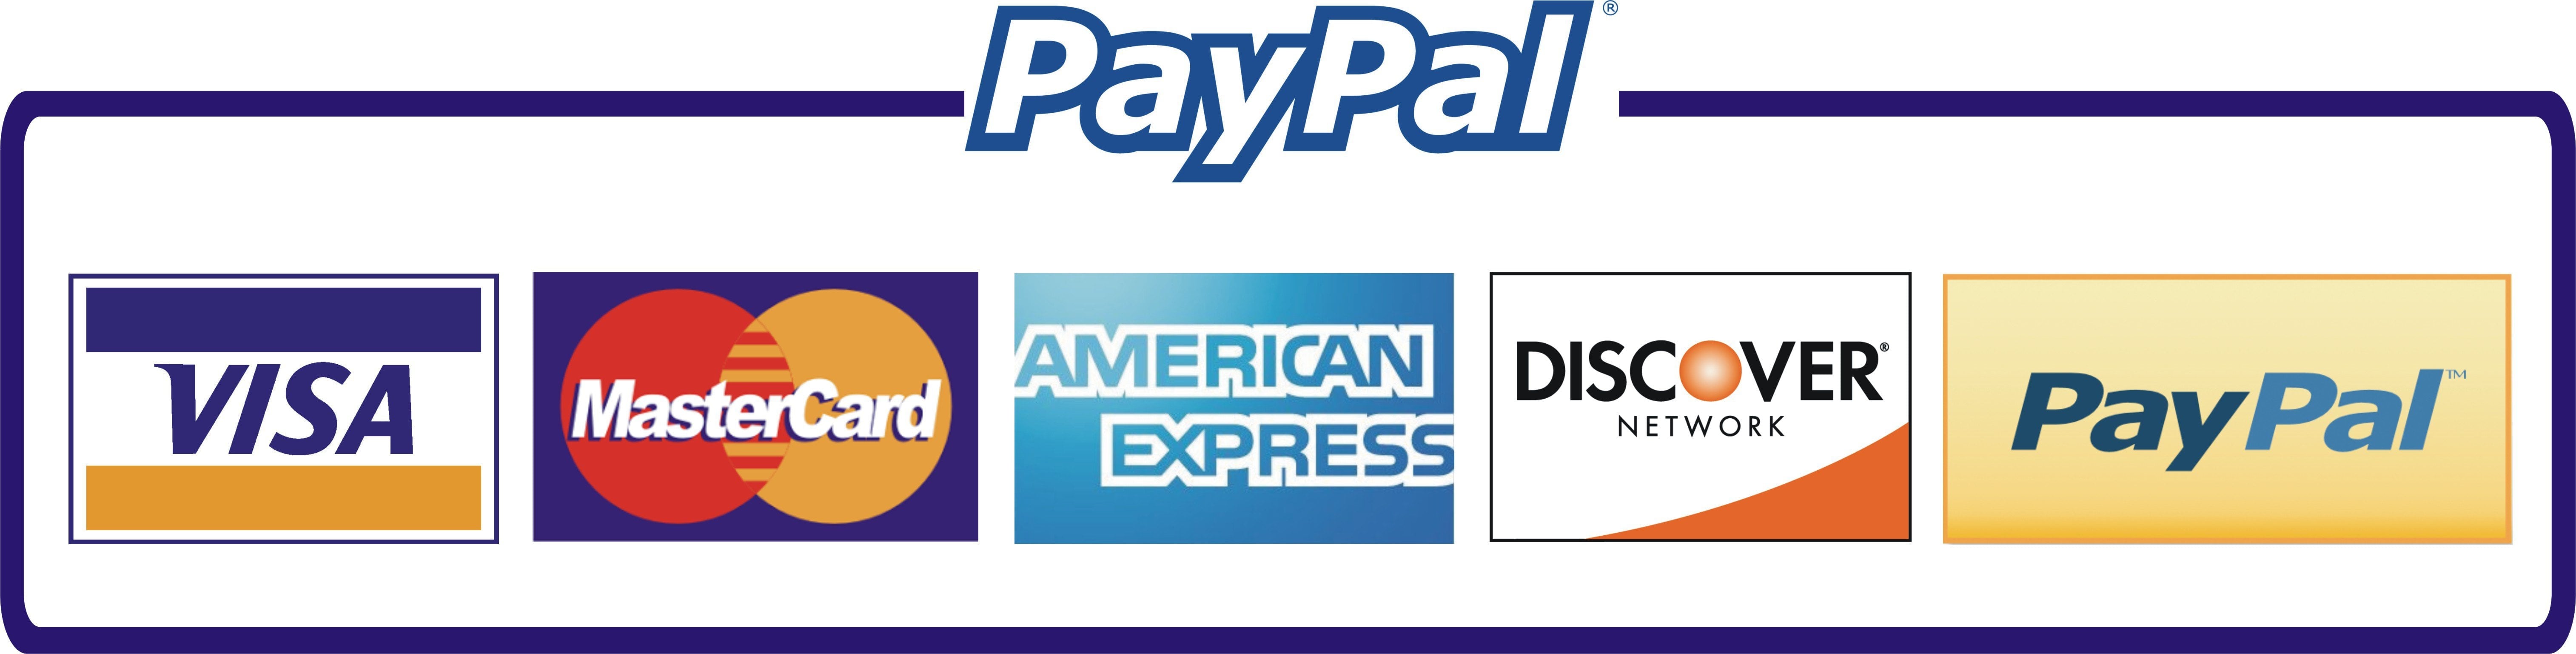 paypal-payment-methods.jpg